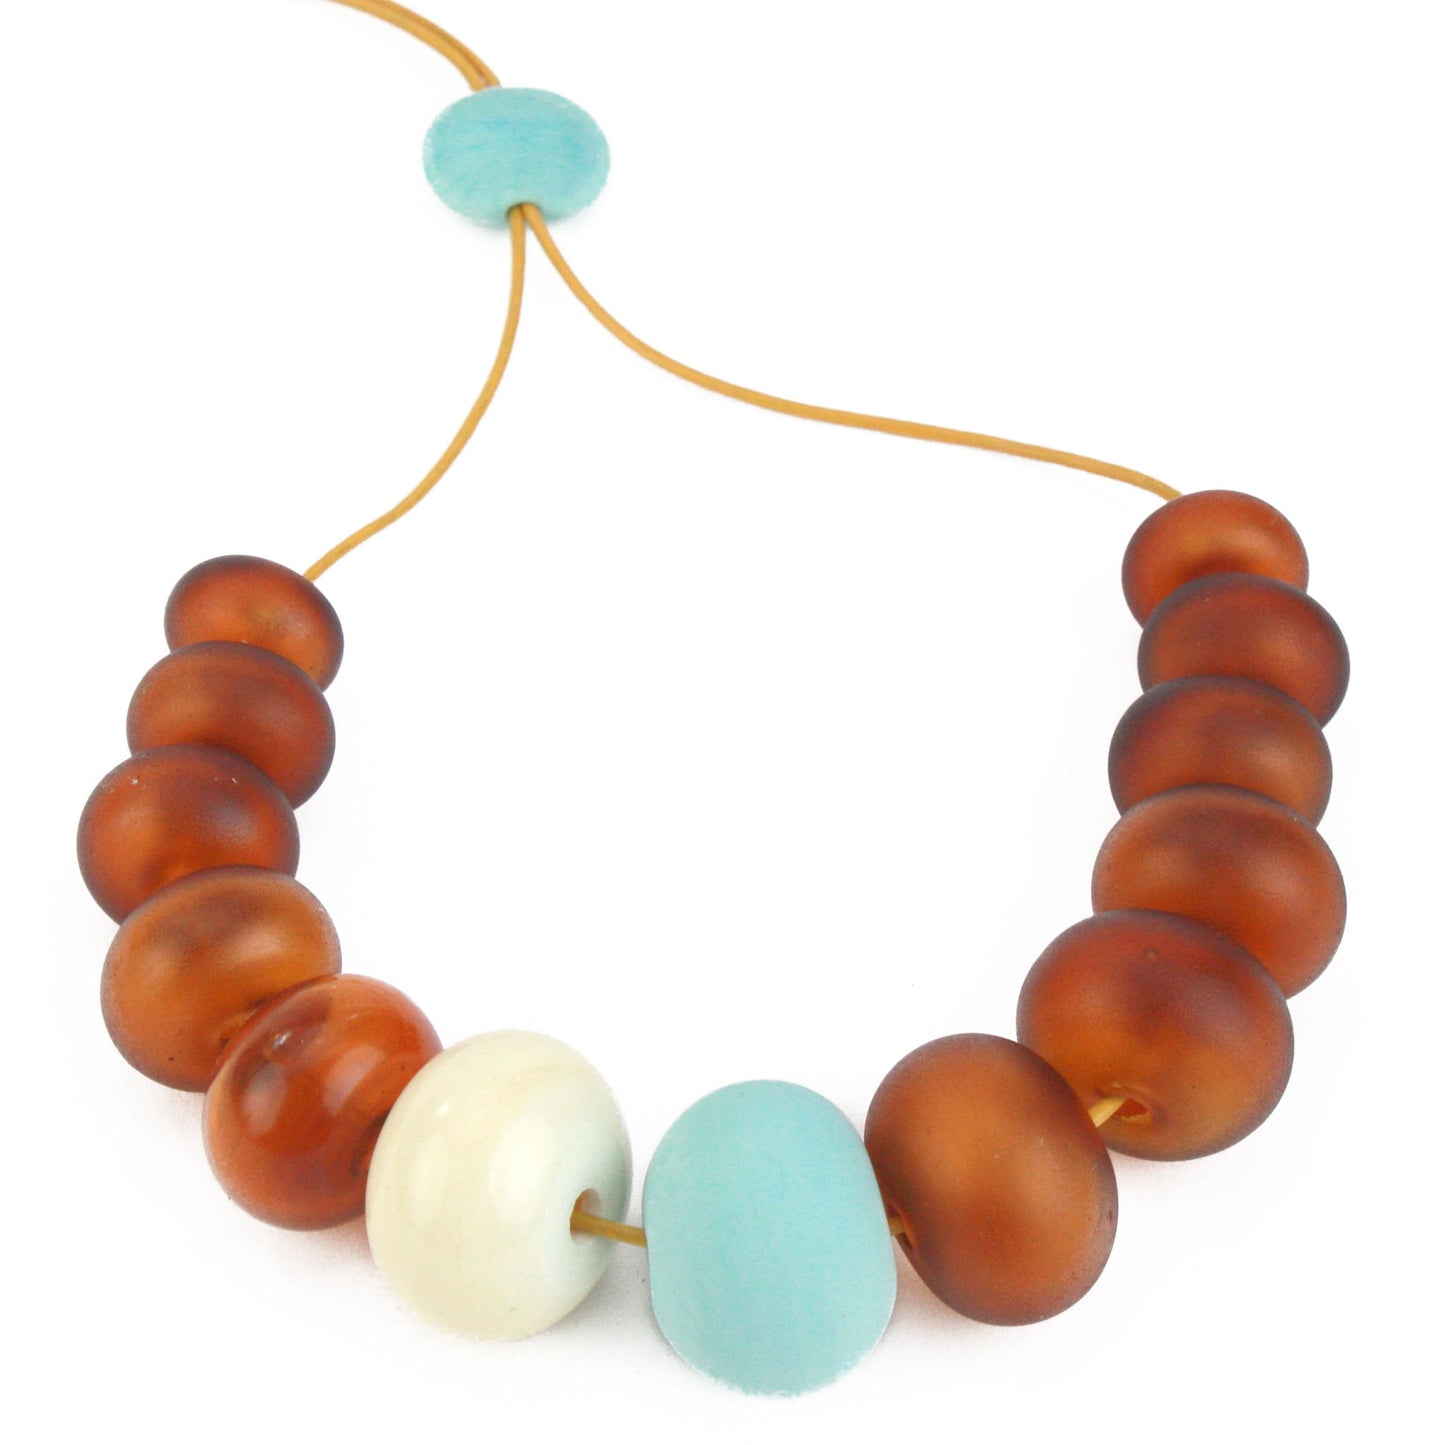 13 bead Bubble necklace - amber, turquoise and ivory